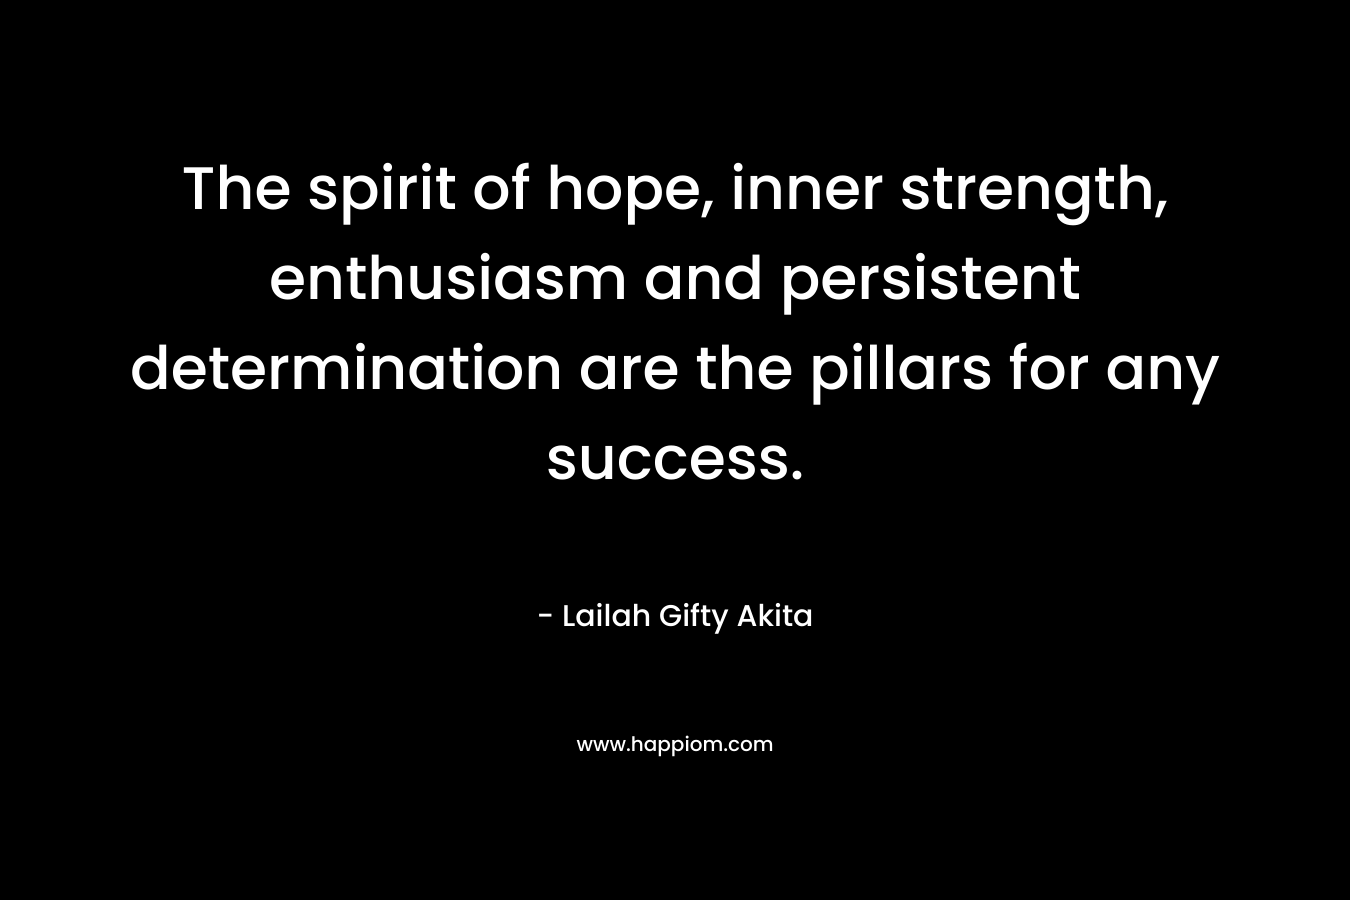 The spirit of hope, inner strength, enthusiasm and persistent determination are the pillars for any success. – Lailah Gifty Akita